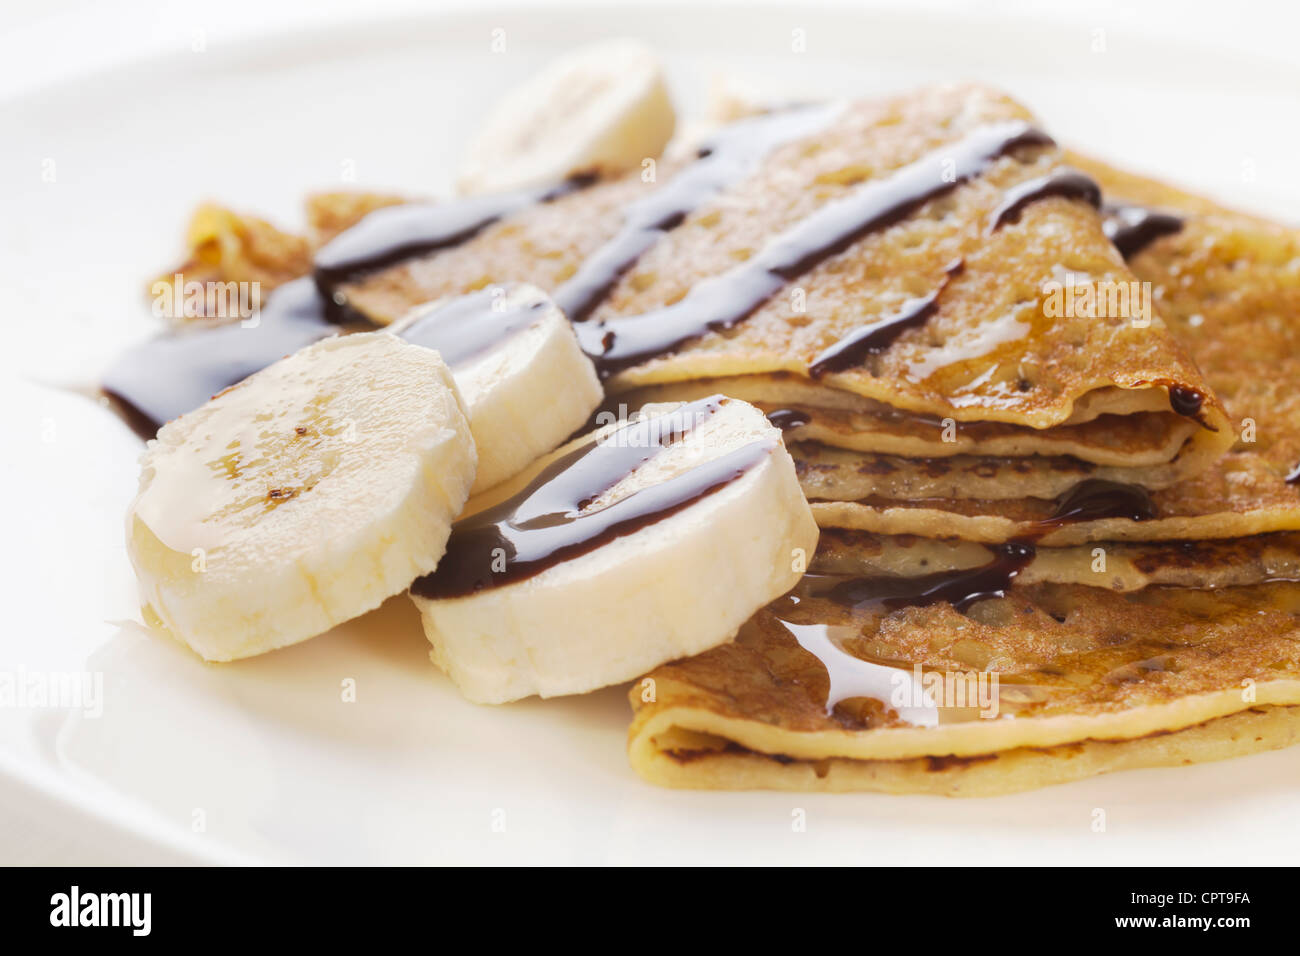 Crepes or pancakes, with banana, maple syrup and chocolate sauce. Stock Photo